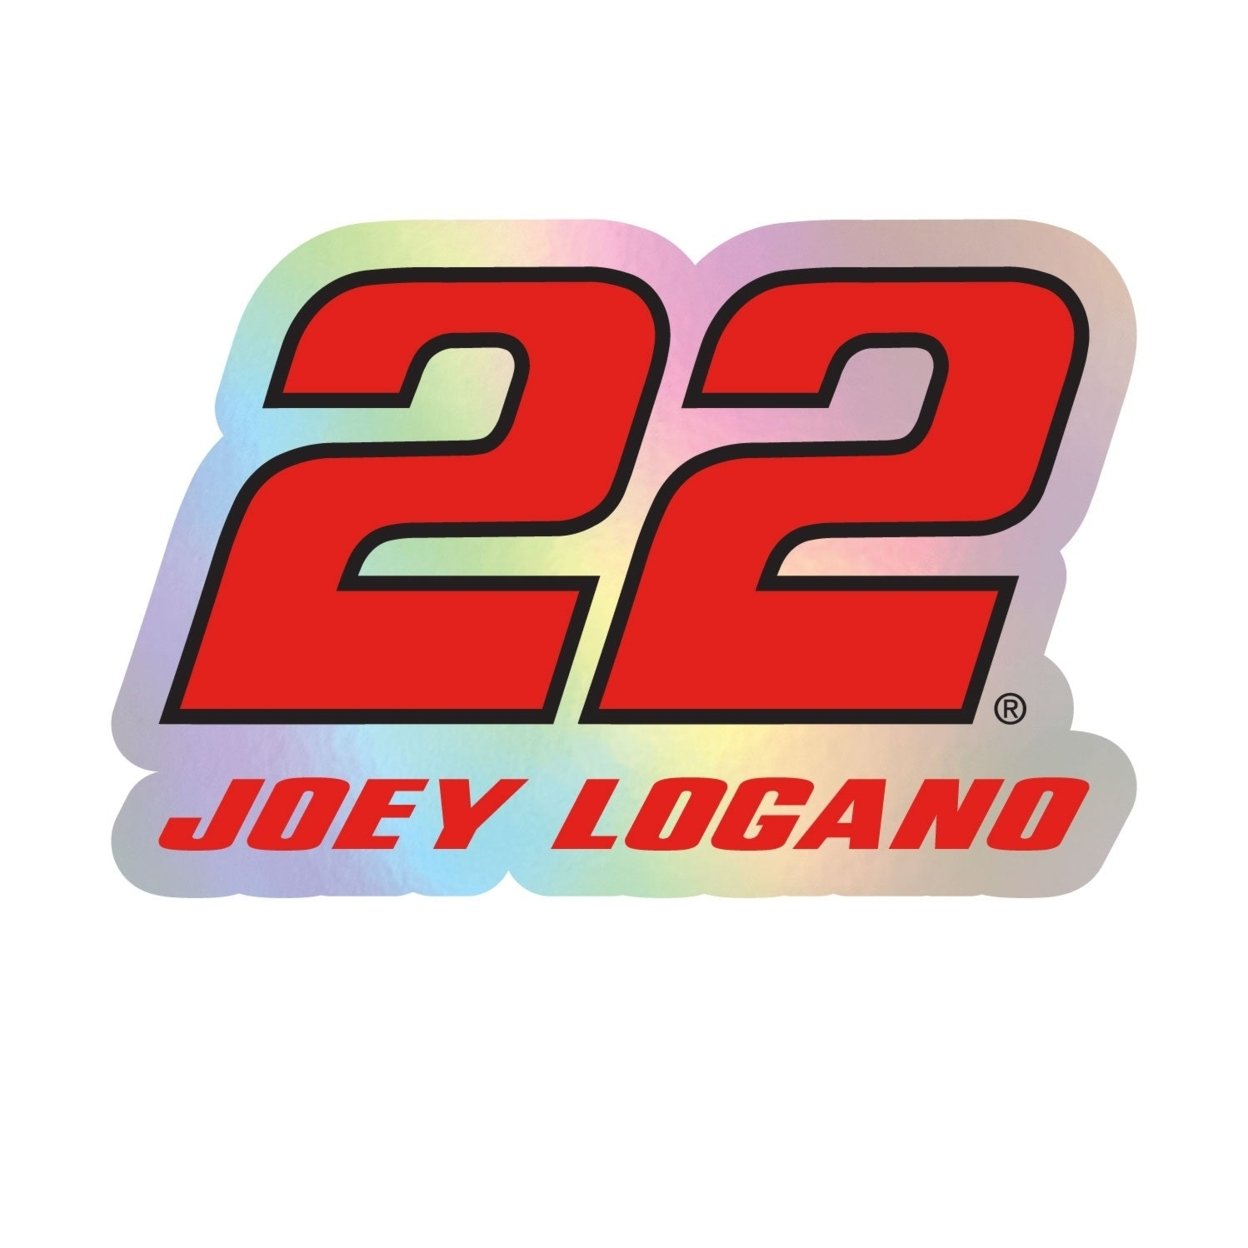 #22 Joey Logano Laser Cut Holographic Decal - 2-Inch